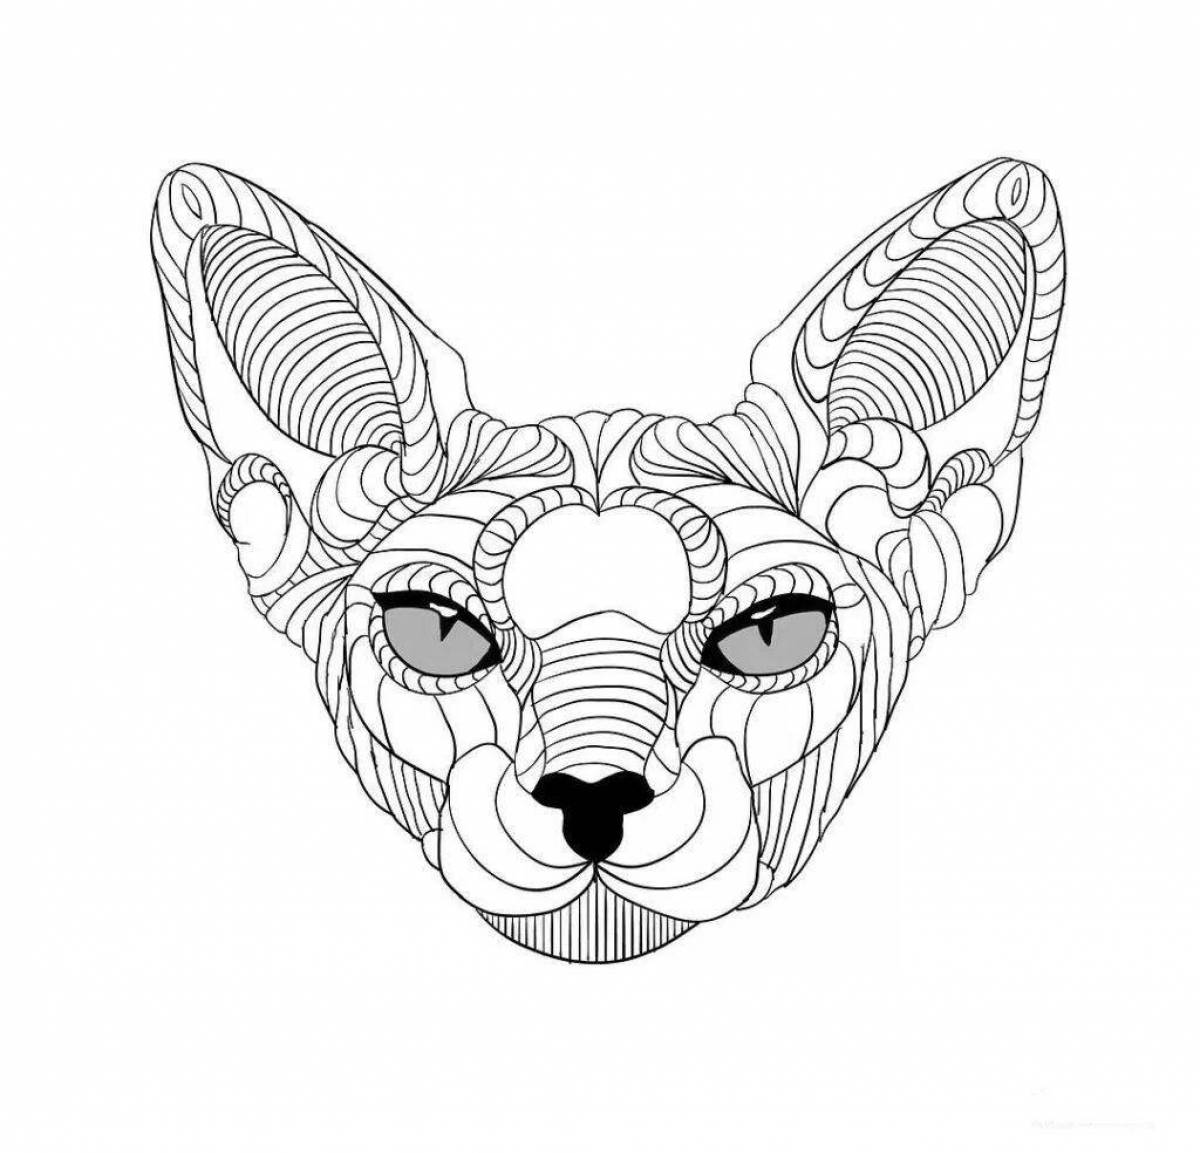 Majestic sphinx coloring page